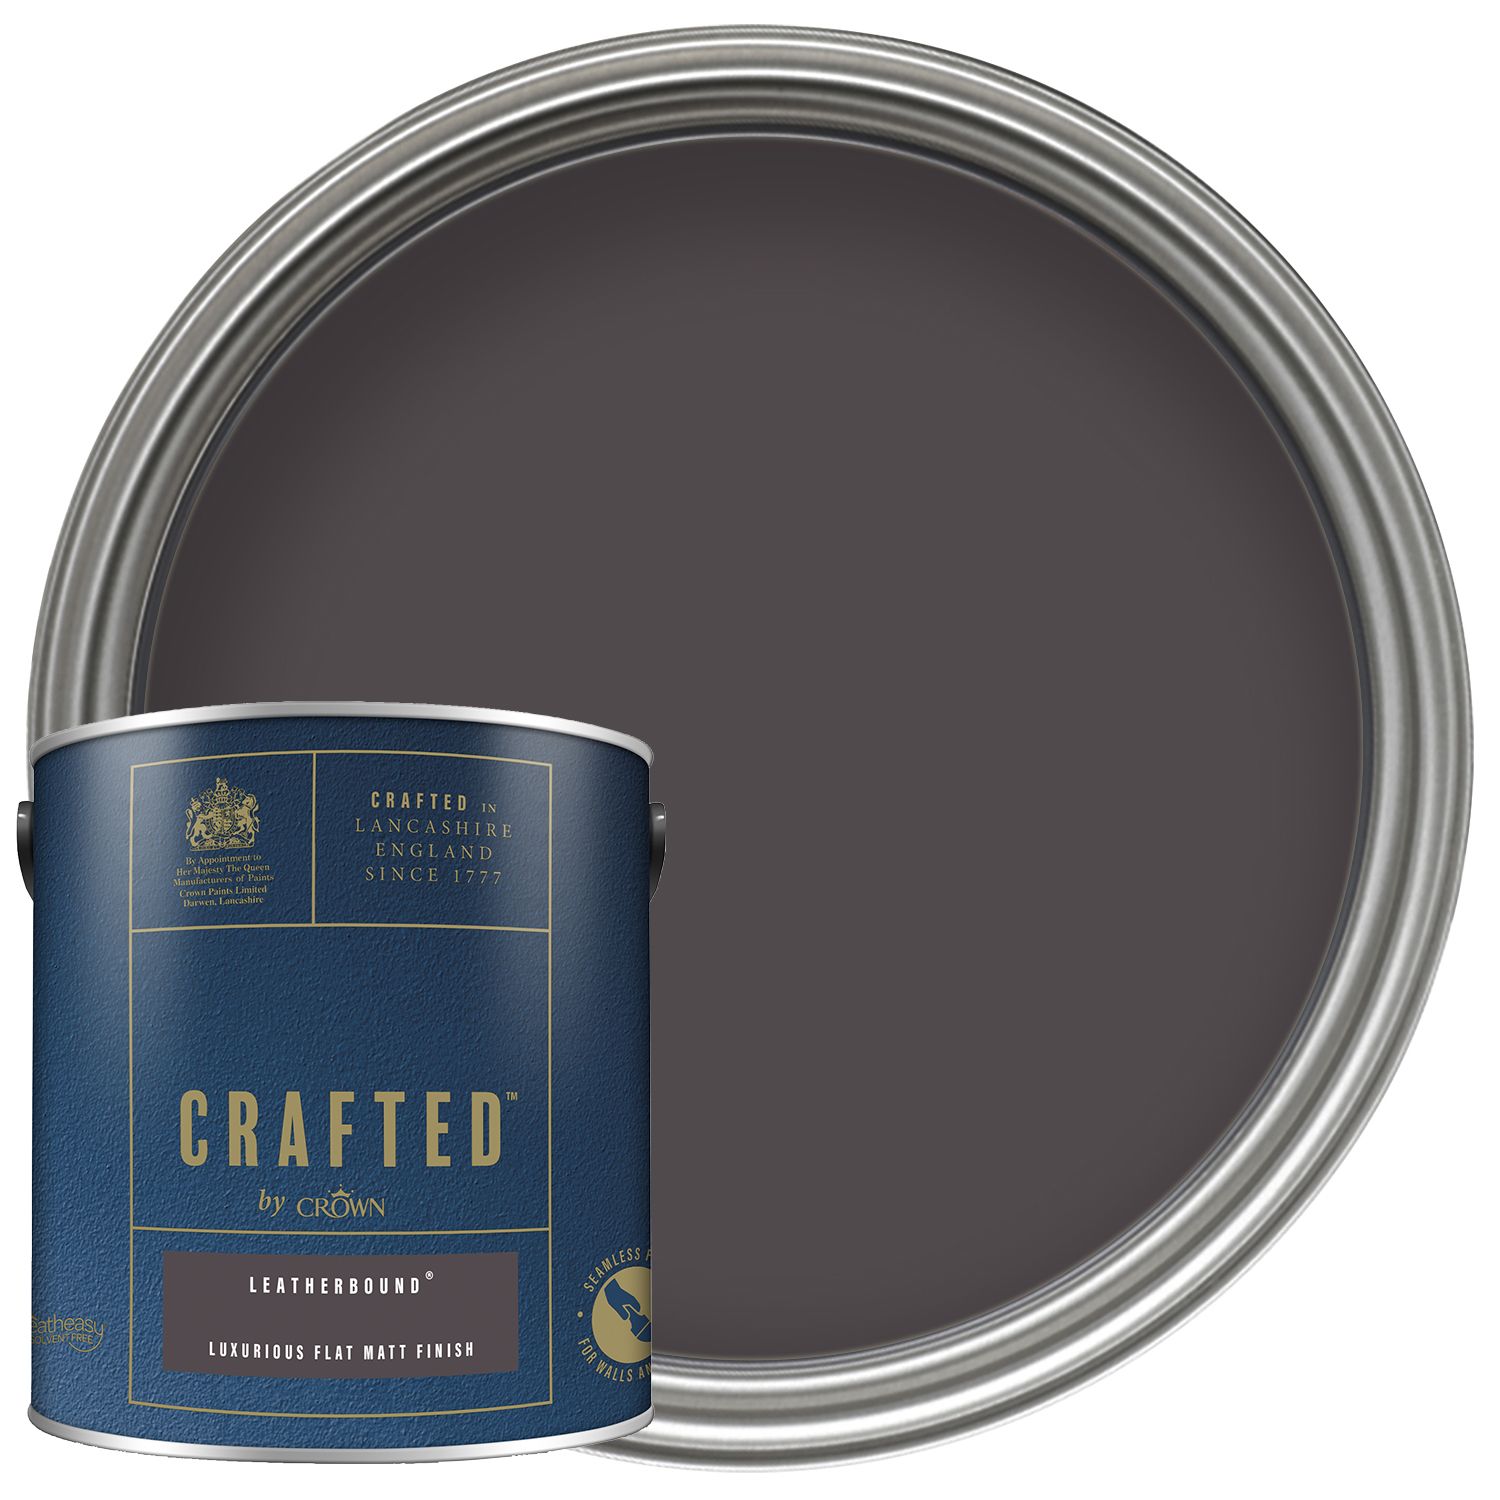 Image of CRAFTED™ by Crown Flat Matt Emulsion Interior Paint - Leatherbound™ - 2.5L